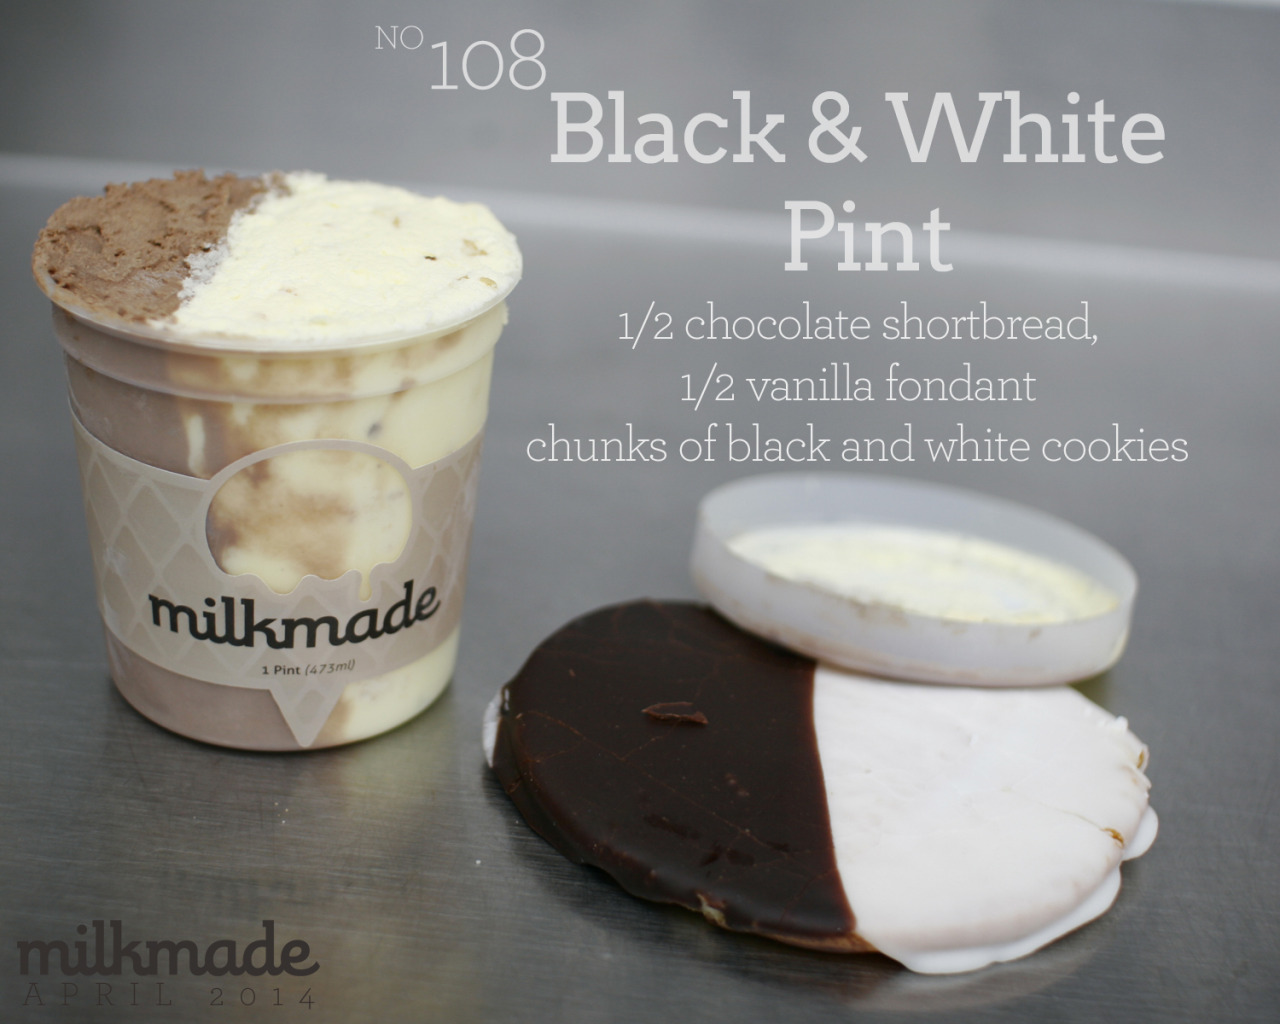 Adventures In Ice Cream Flavor Of The Month Flavor 108 Black White